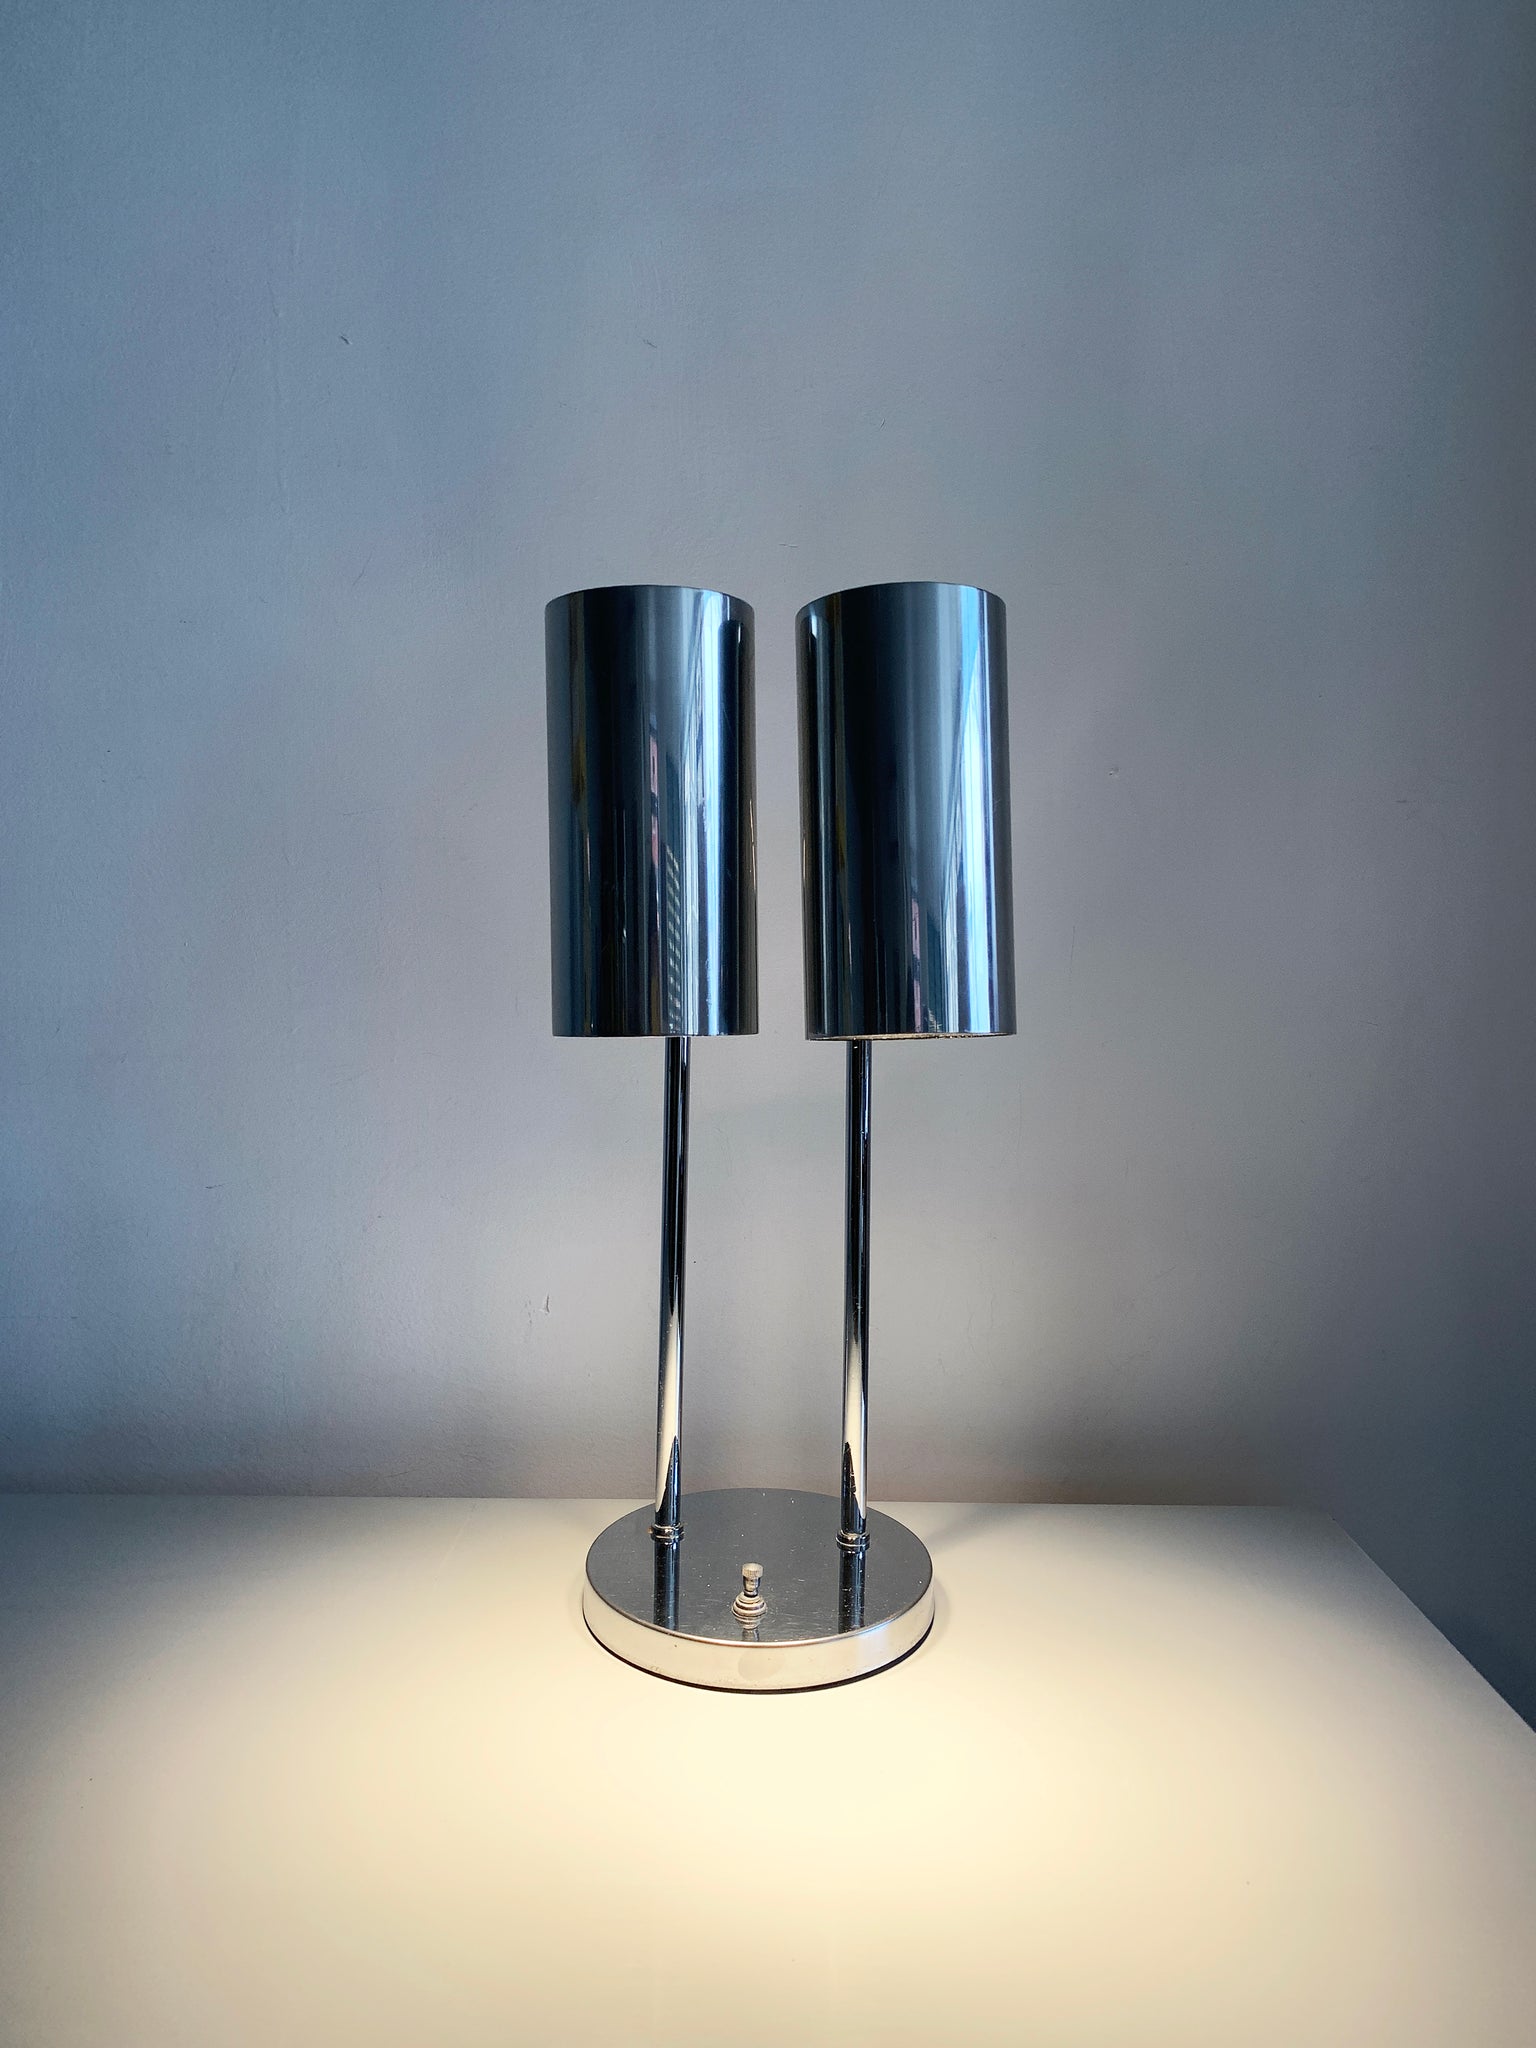 Two-Headed Directional Chrome Table Lamp by Robert Sonneman For Koch+Lowy